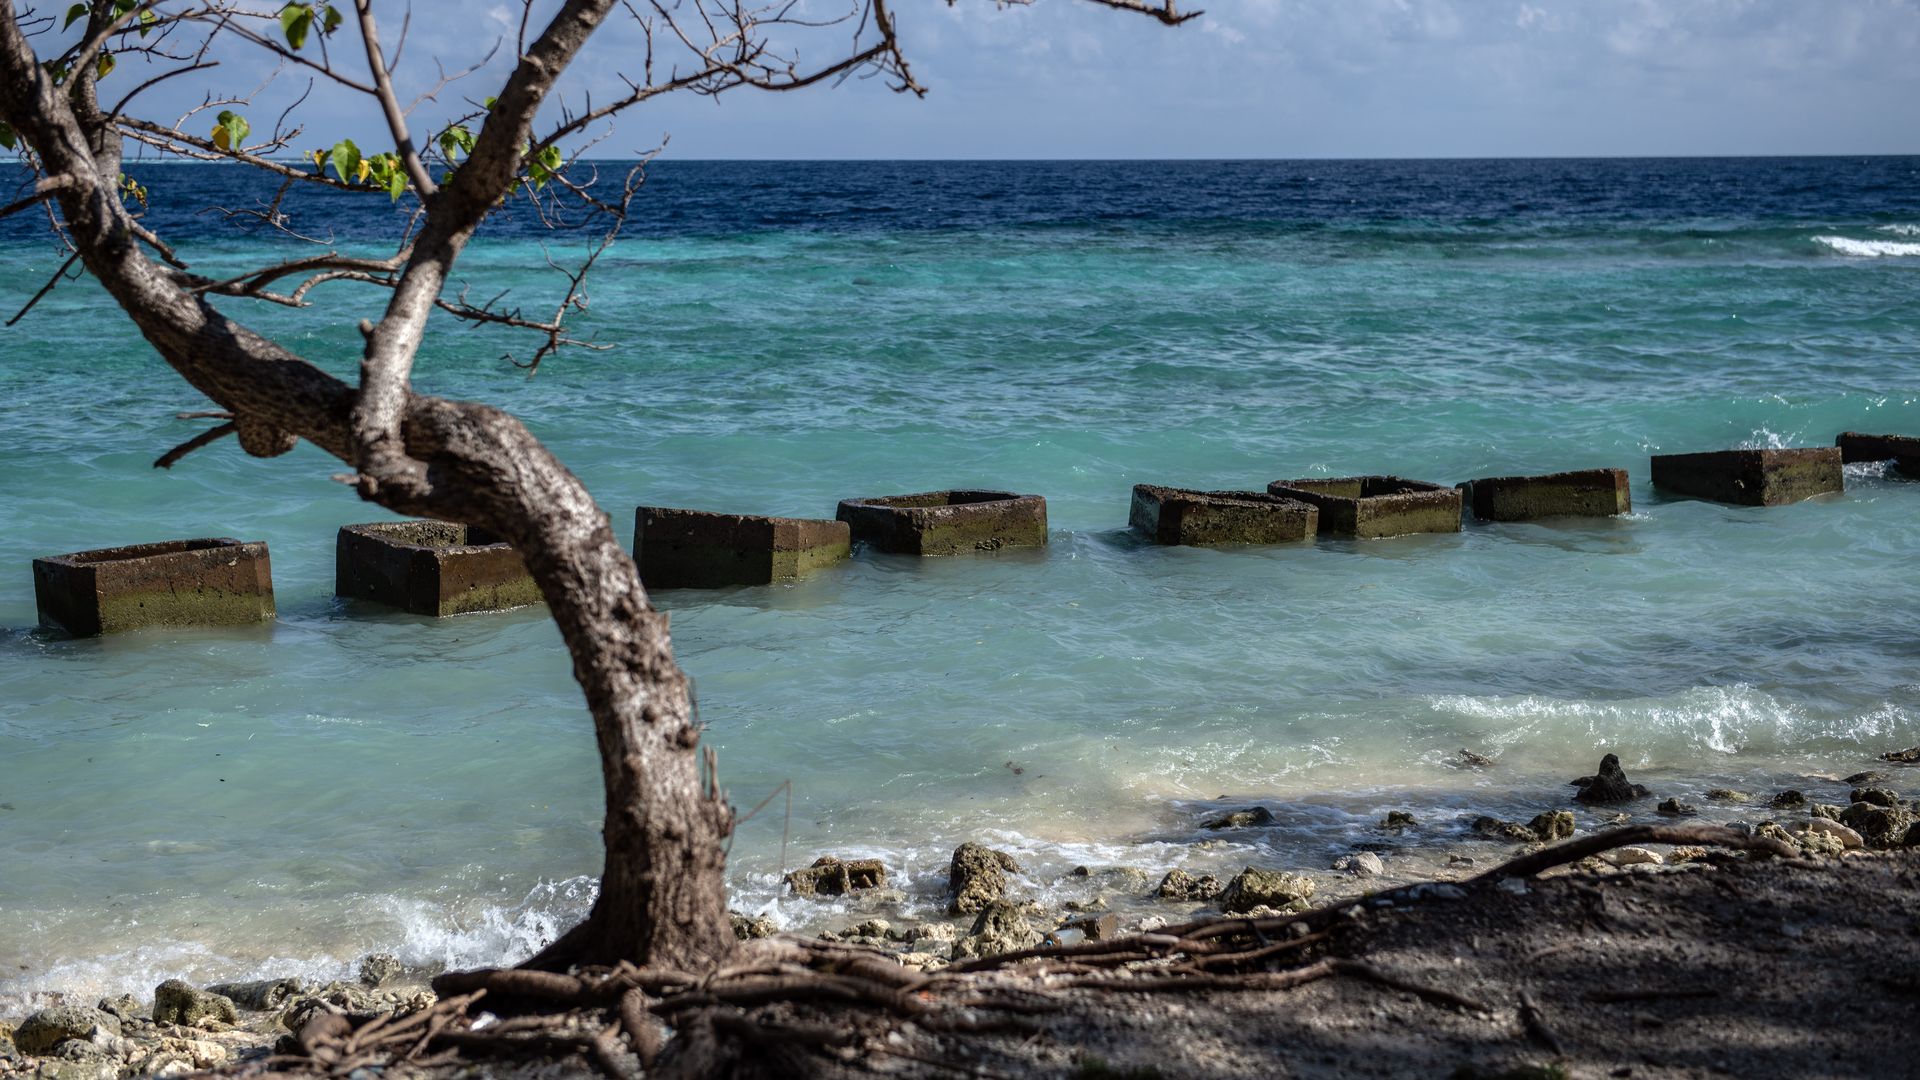 Concrete blocks are placed along the shoreline to try and prevent further coastal erosion, on December 17, 2019 in Mahibadhoo, Maldives. 